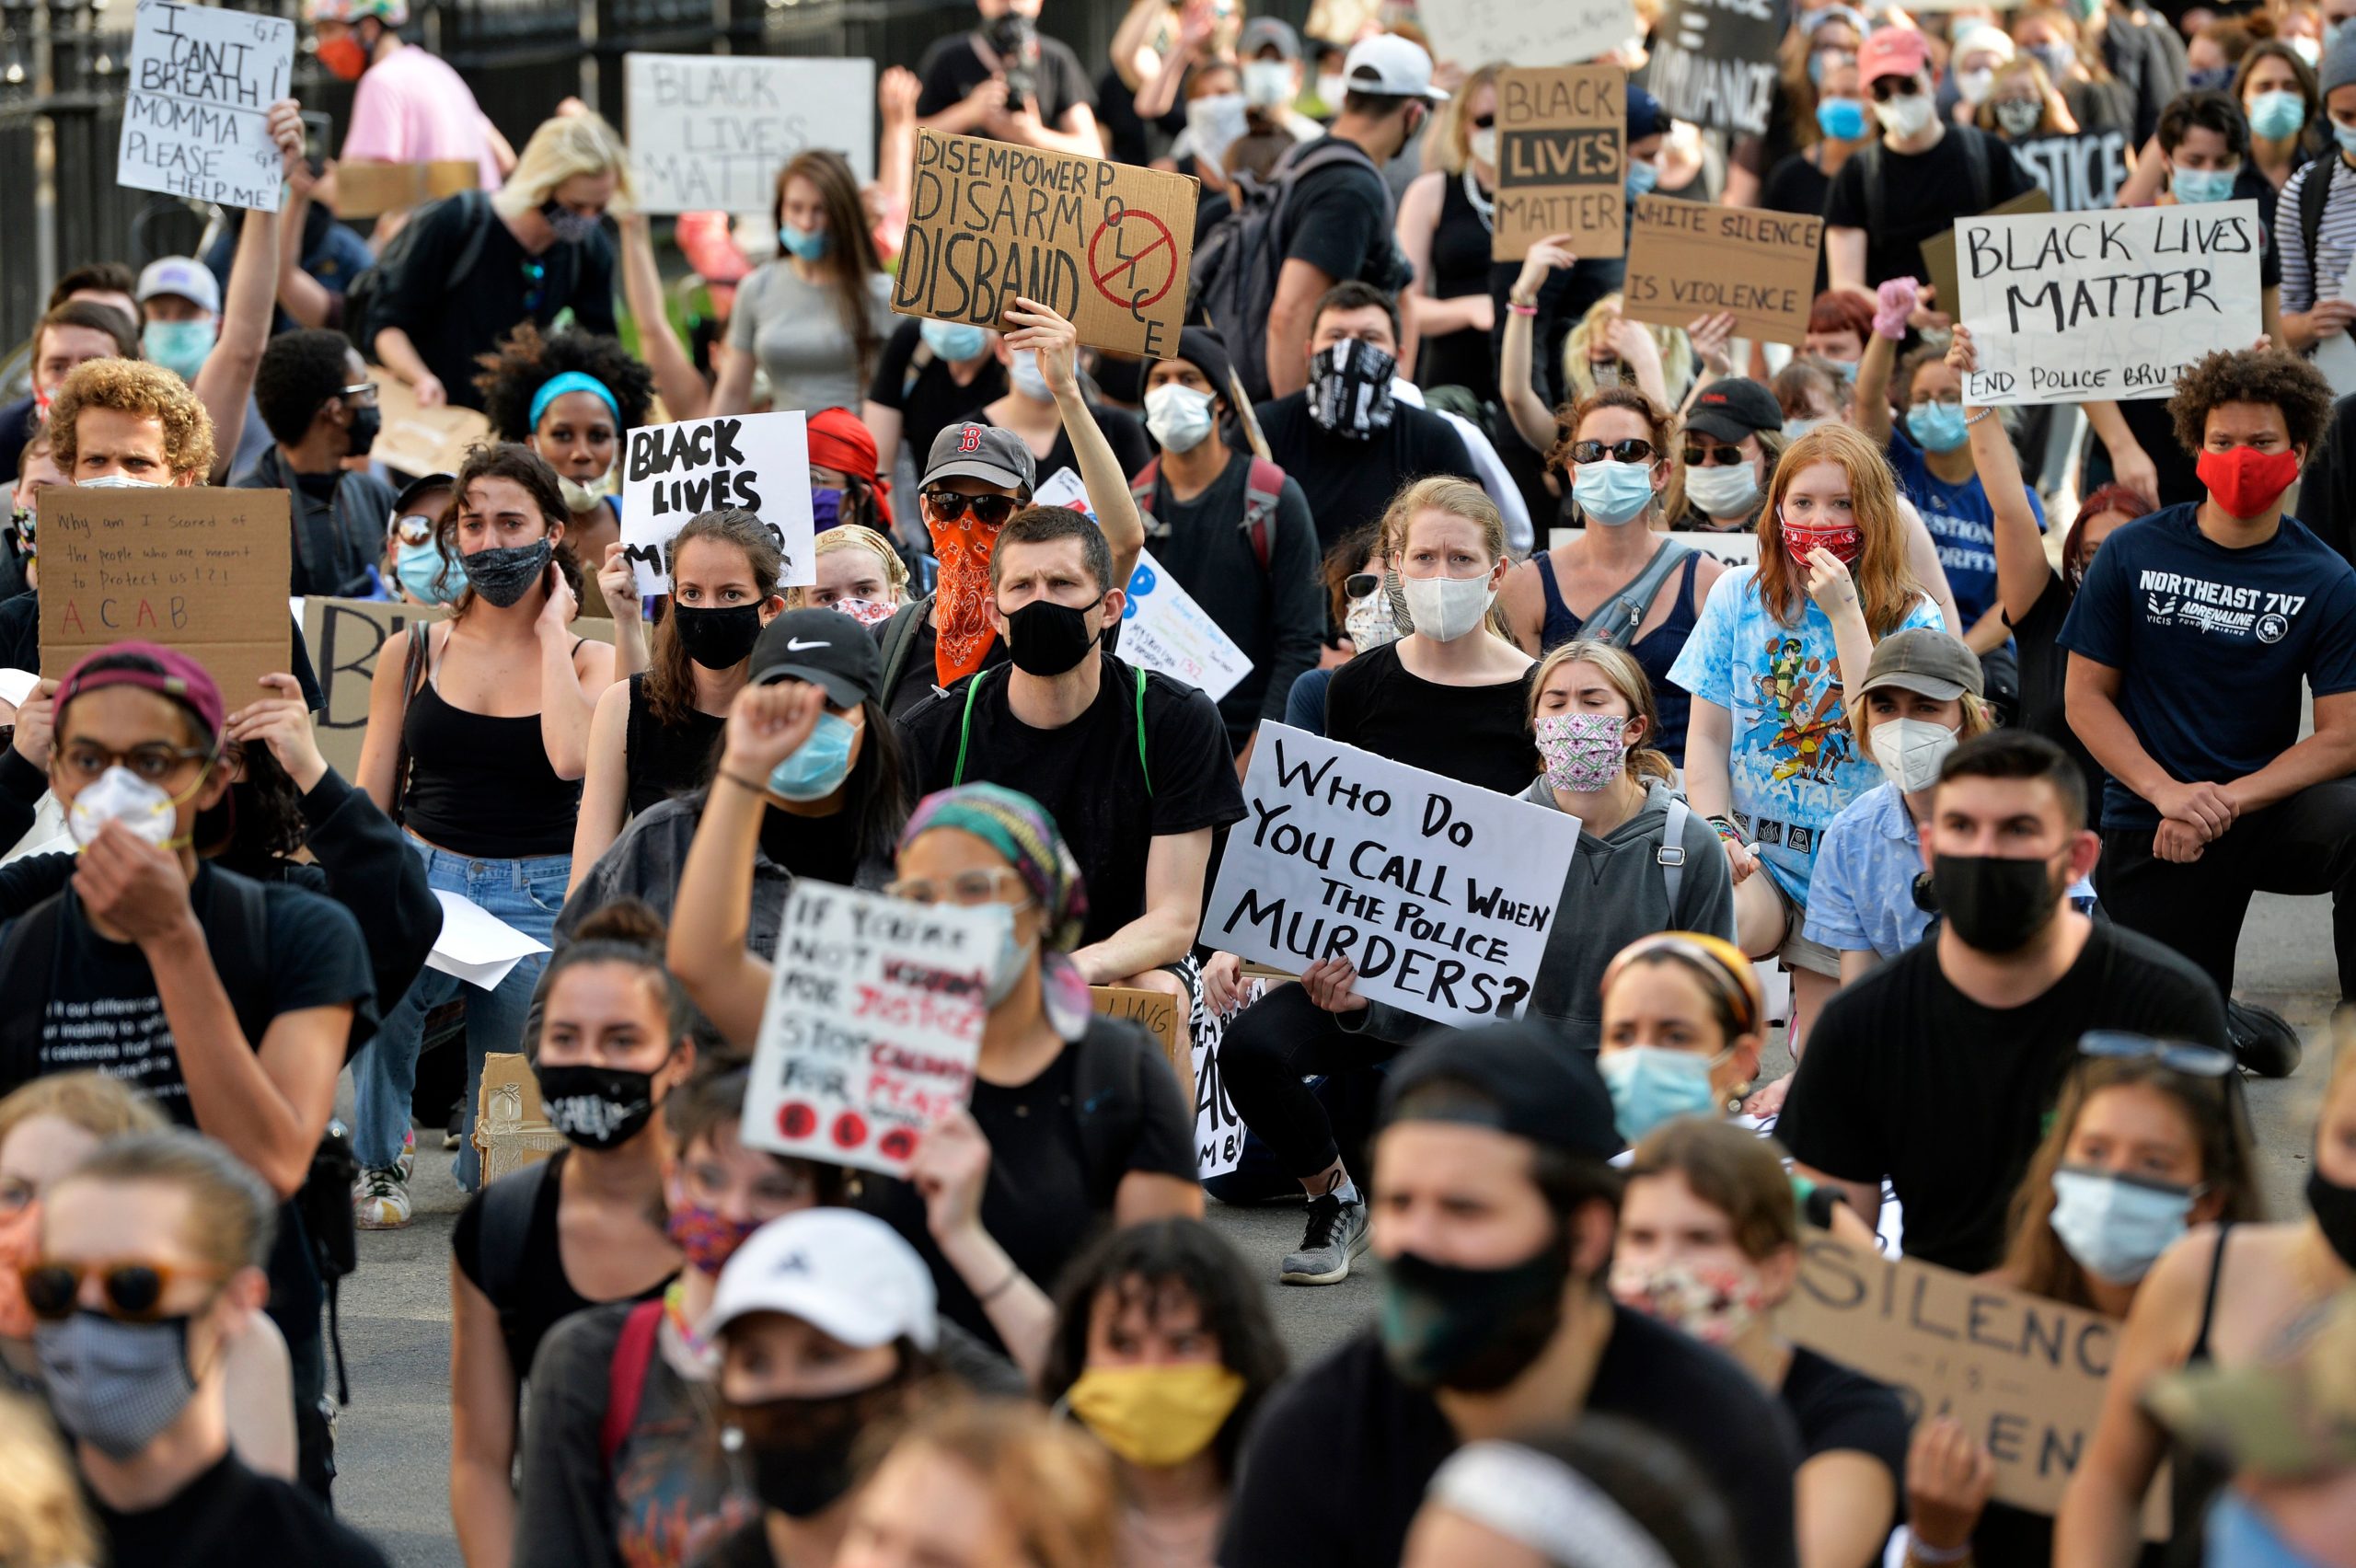 People march during a "Black Lives Matter" rally, in response to the death of George Floyd and other victims of Police Racism across the US, in Boston, Massachusetts on June 3, 2020. - Anti-racism protests have put several US cities under curfew to suppress rioting, following the death of George Floyd while in police custody. (Photo by Joseph Prezioso / AFP) (Photo by JOSEPH PREZIOSO/AFP via Getty Images)